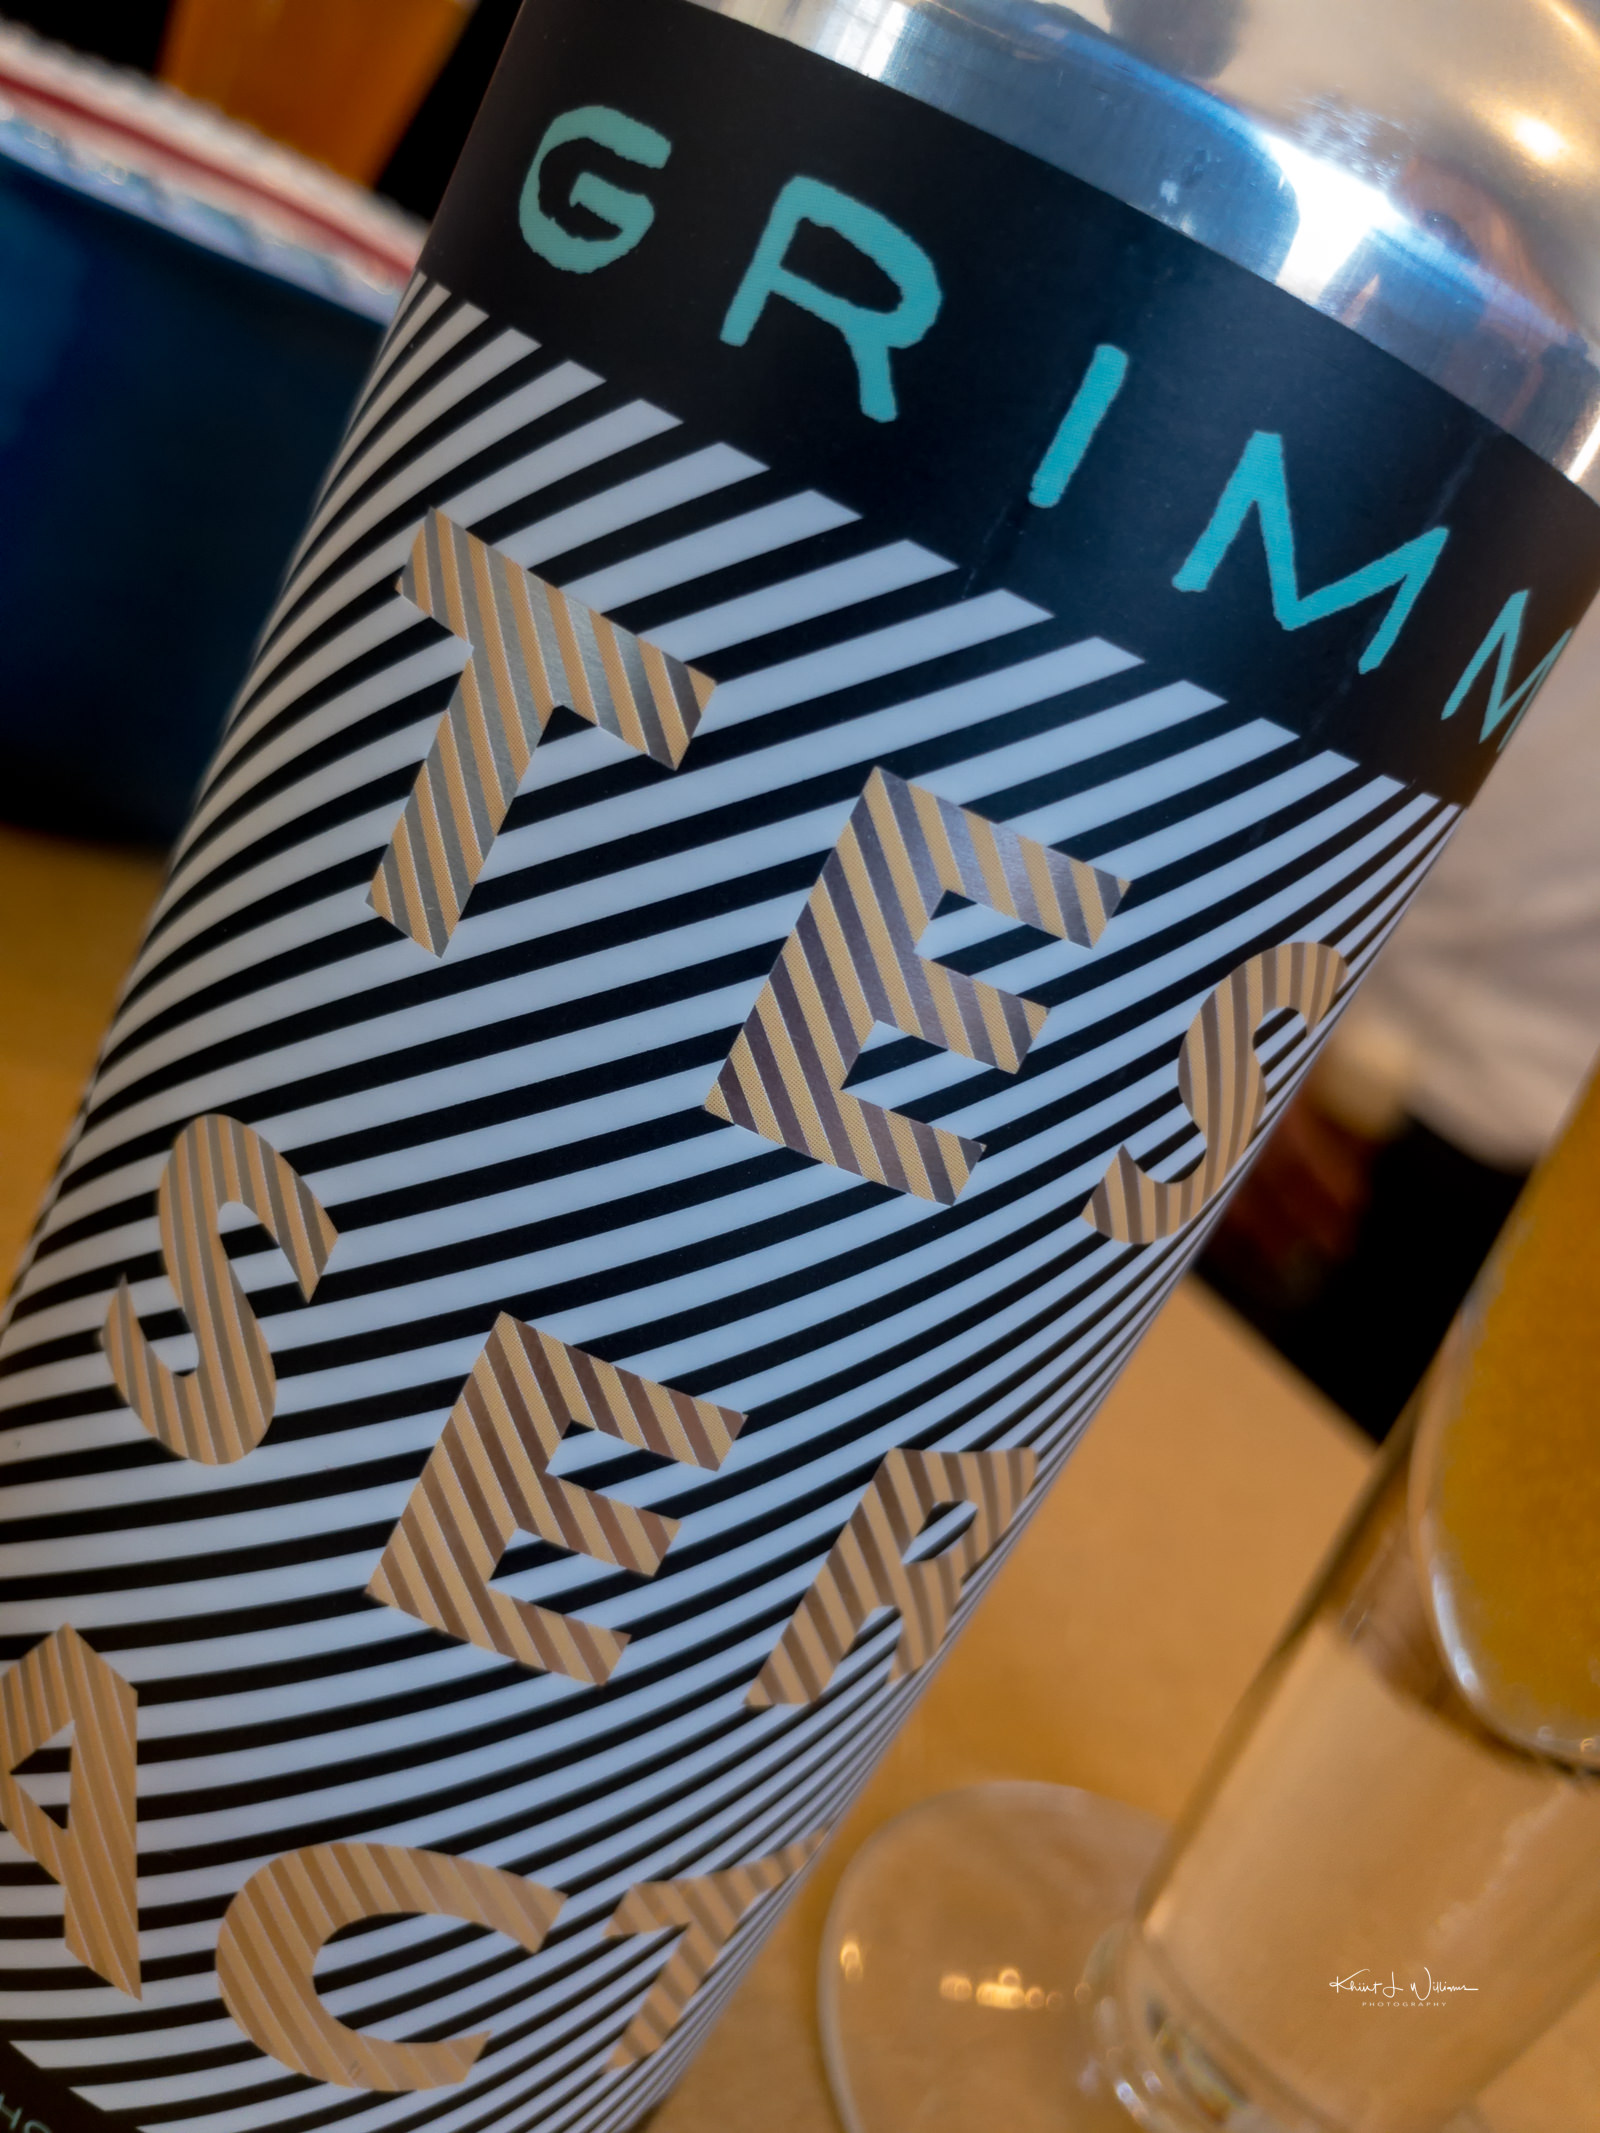 Grimm Artisanal Ales's Double Dry-Hopped Tesseract